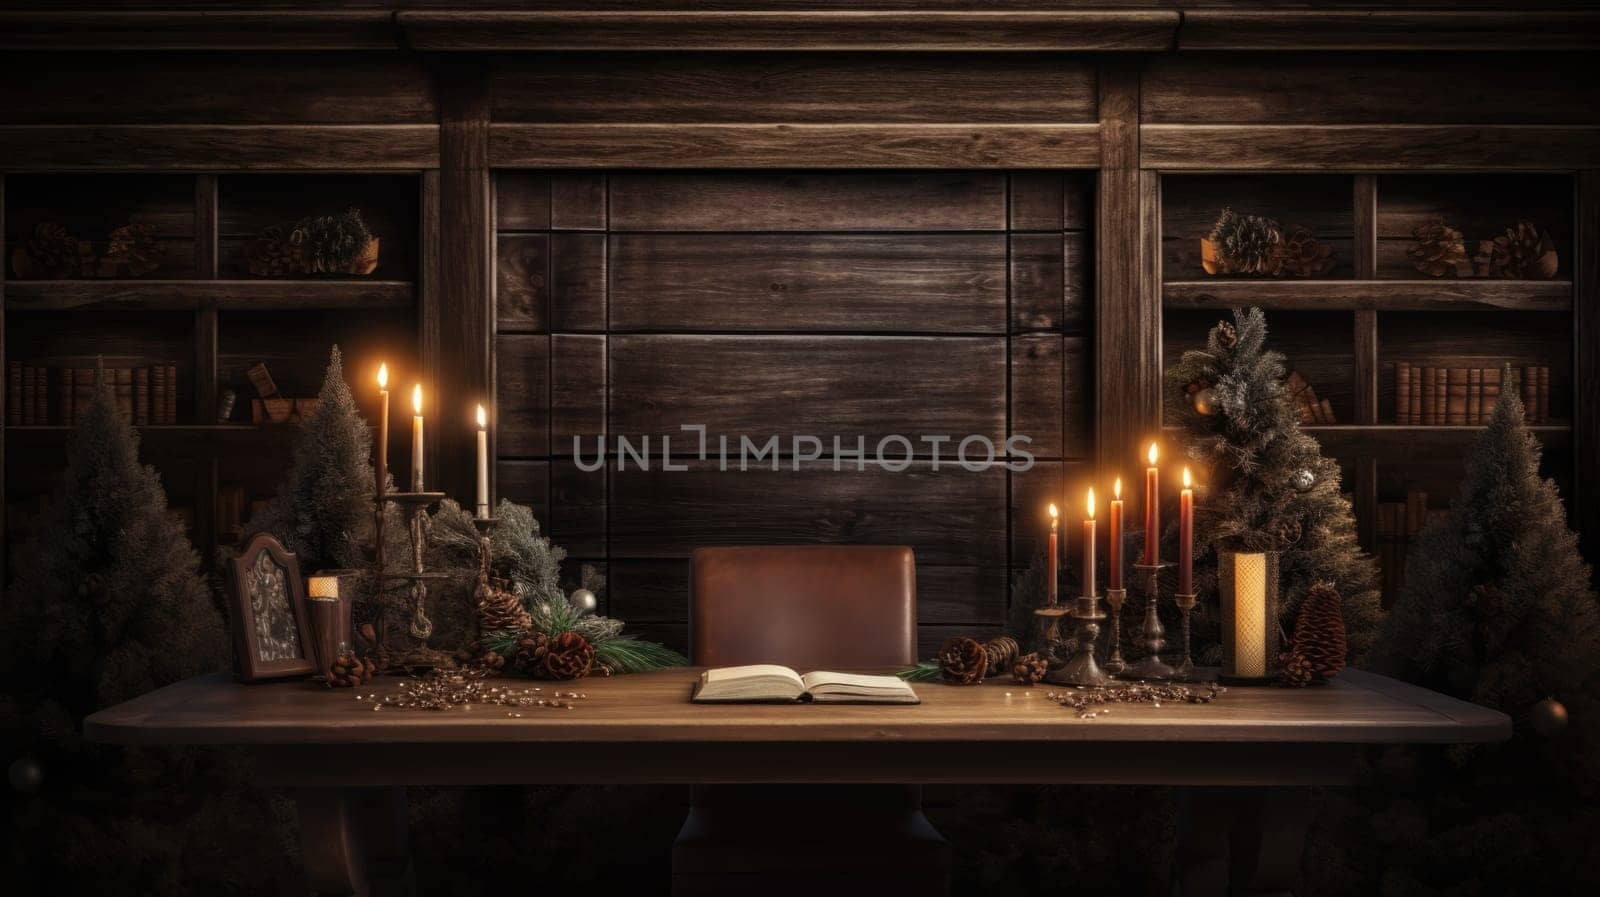 wider view of wooden desk with christmas decor comeliness by biancoblue